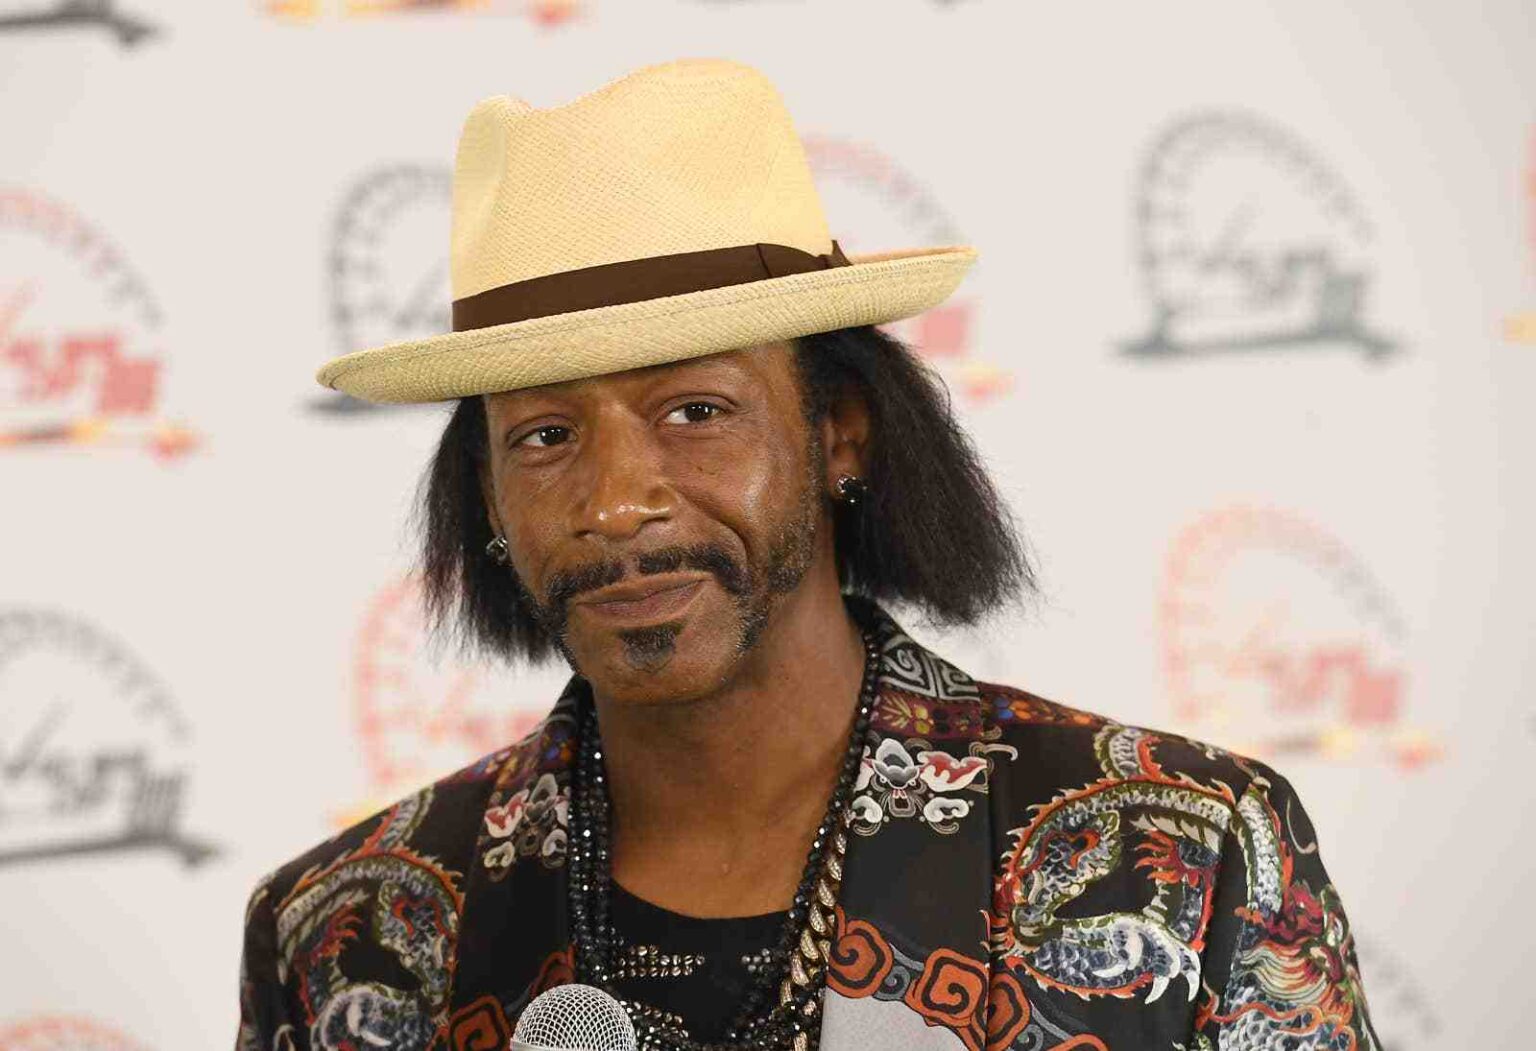 "Uncover the fiscal punchline behind Katt Williams's net worth. Dive into the highs, lows, and laughter-filled life of this comedy maverick on FilmDaily.co!"